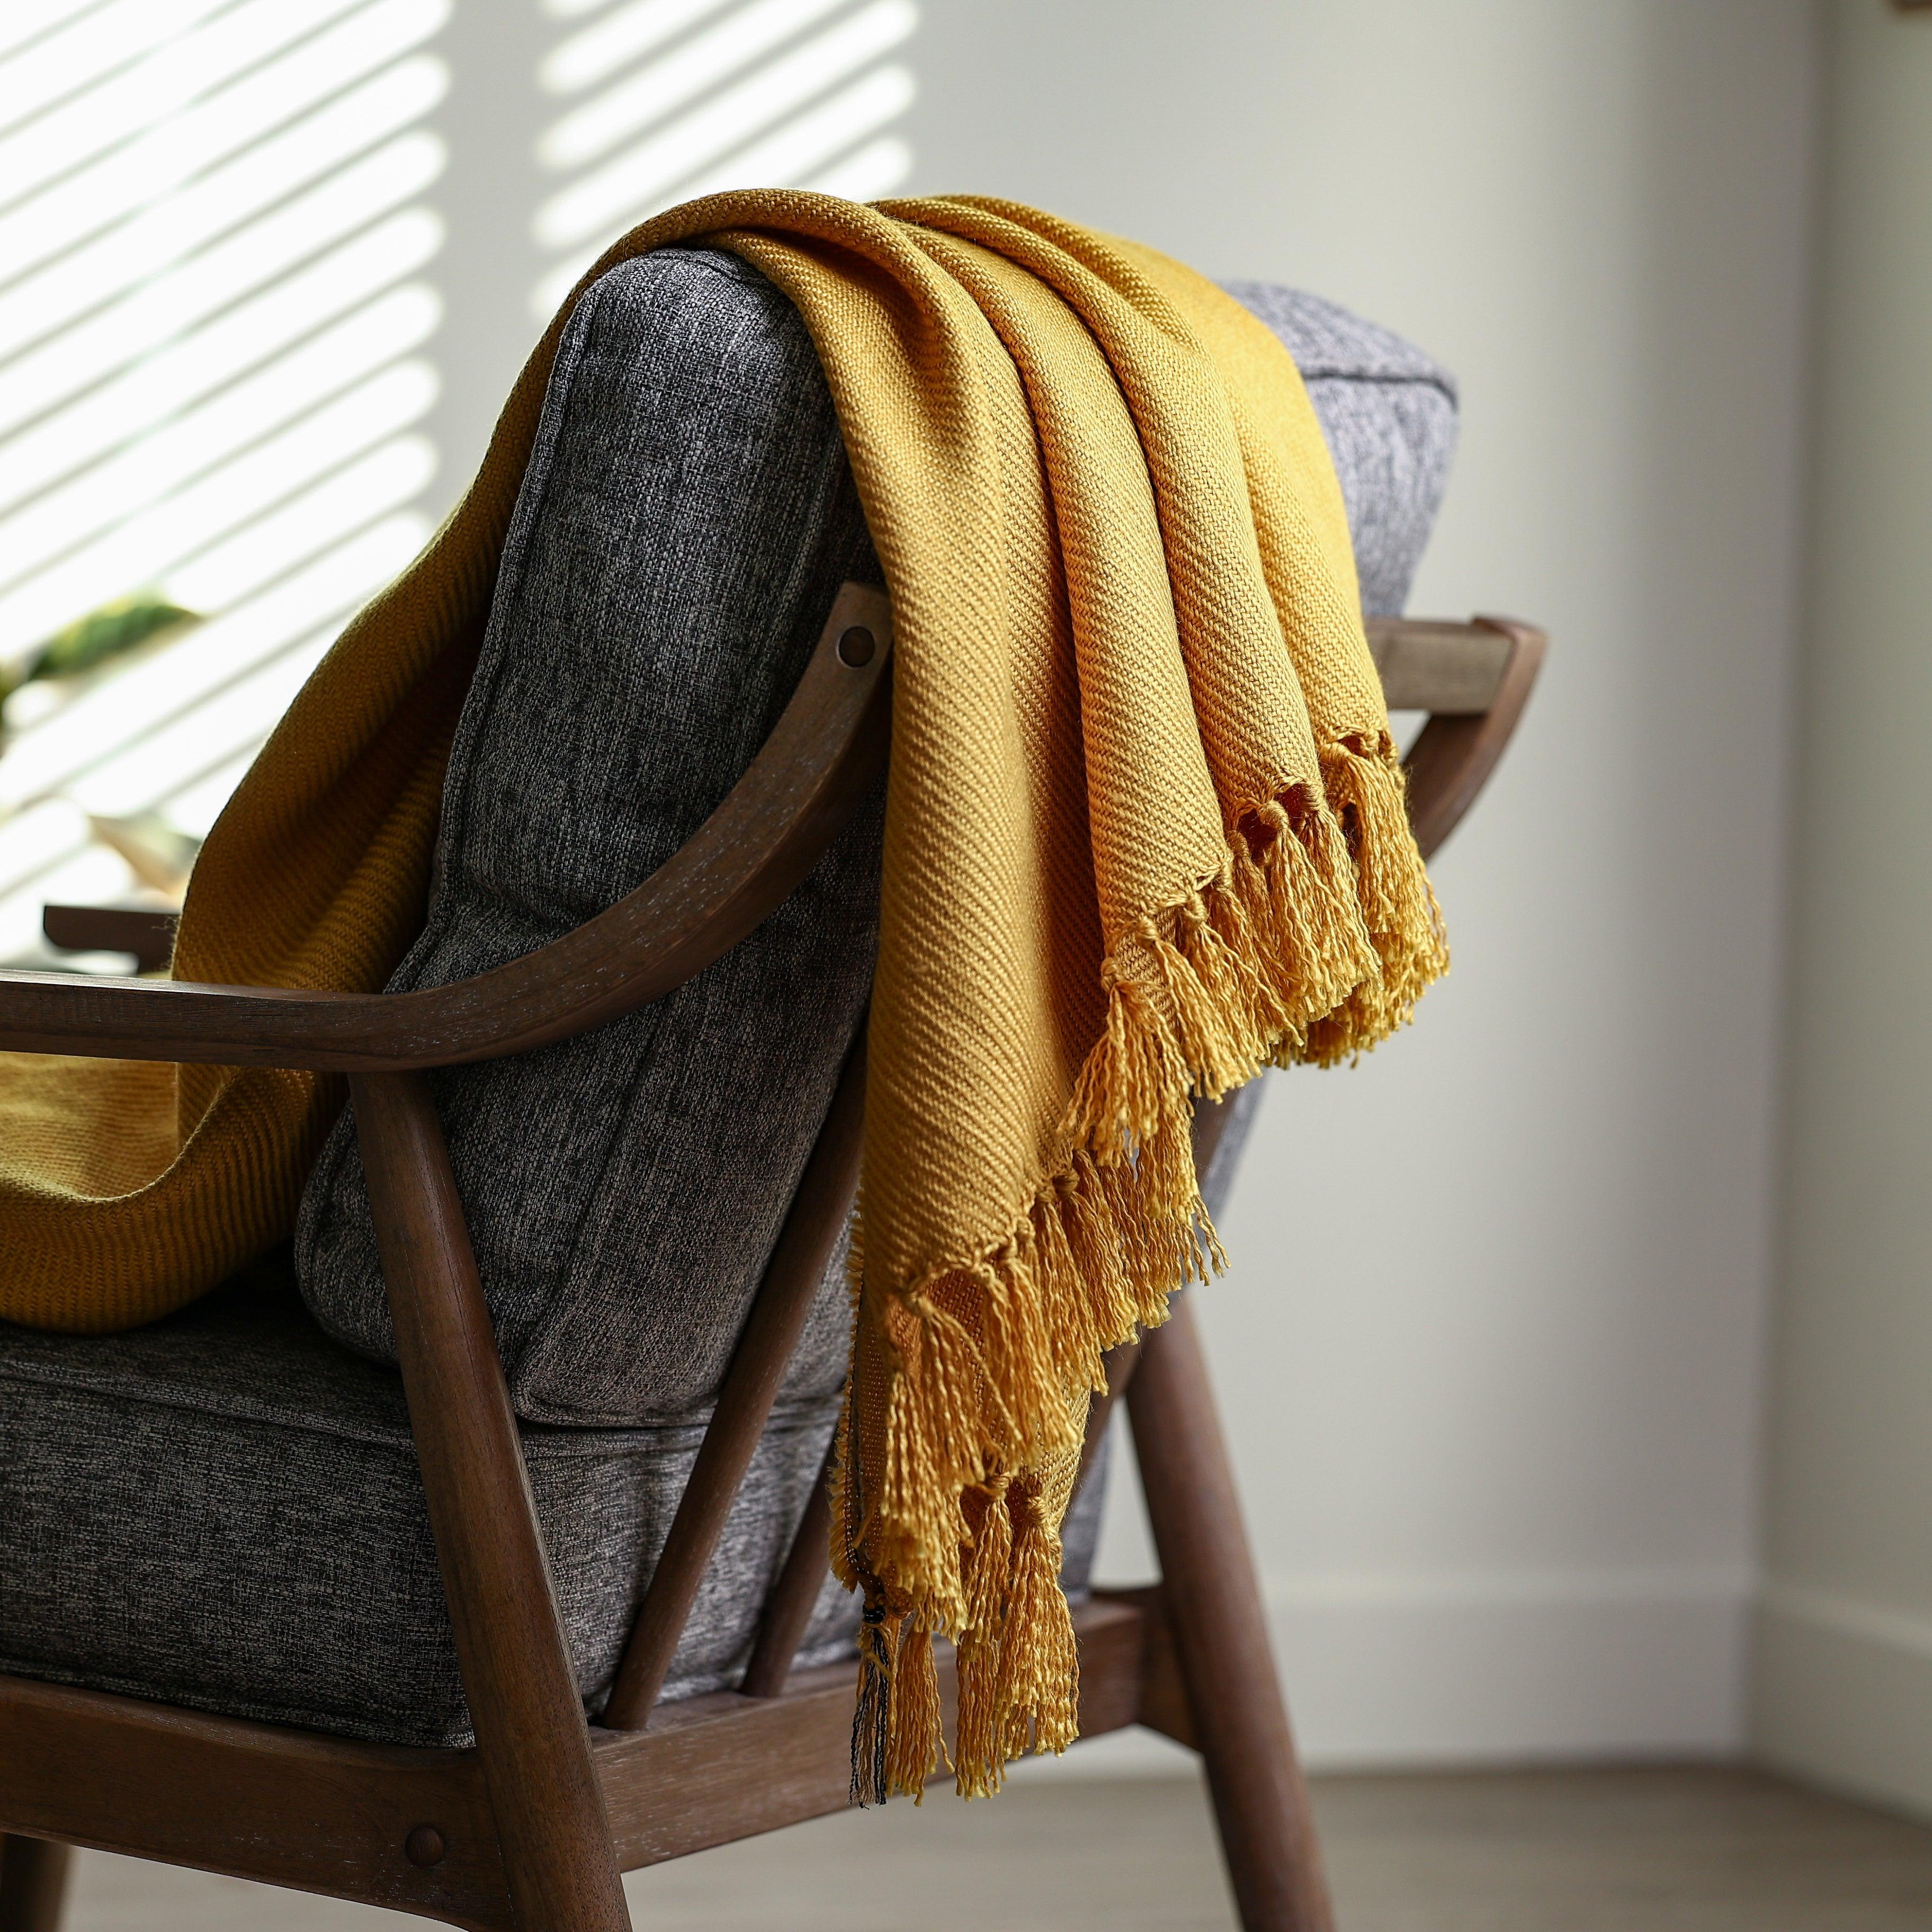 soft yellow acrylic throw blanket draped and styled over a couch decoratively